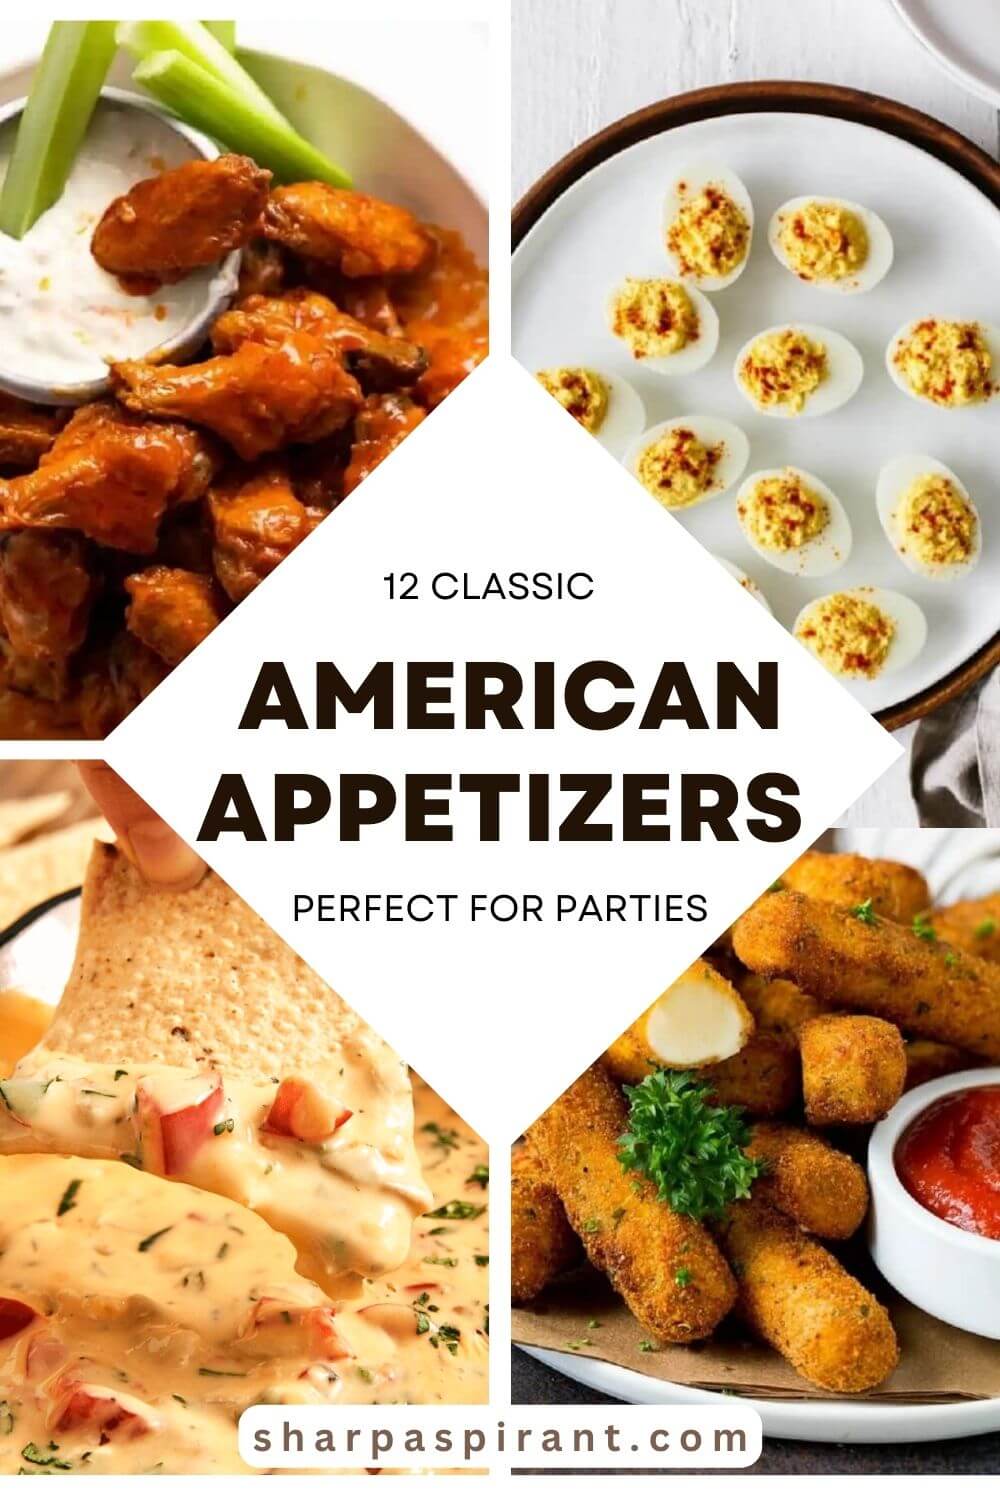 These classic American appetizers will have your taste buds singing whether you're hosting a party, having friends over for a casual dinner, or just in the mood for some tasty treats.